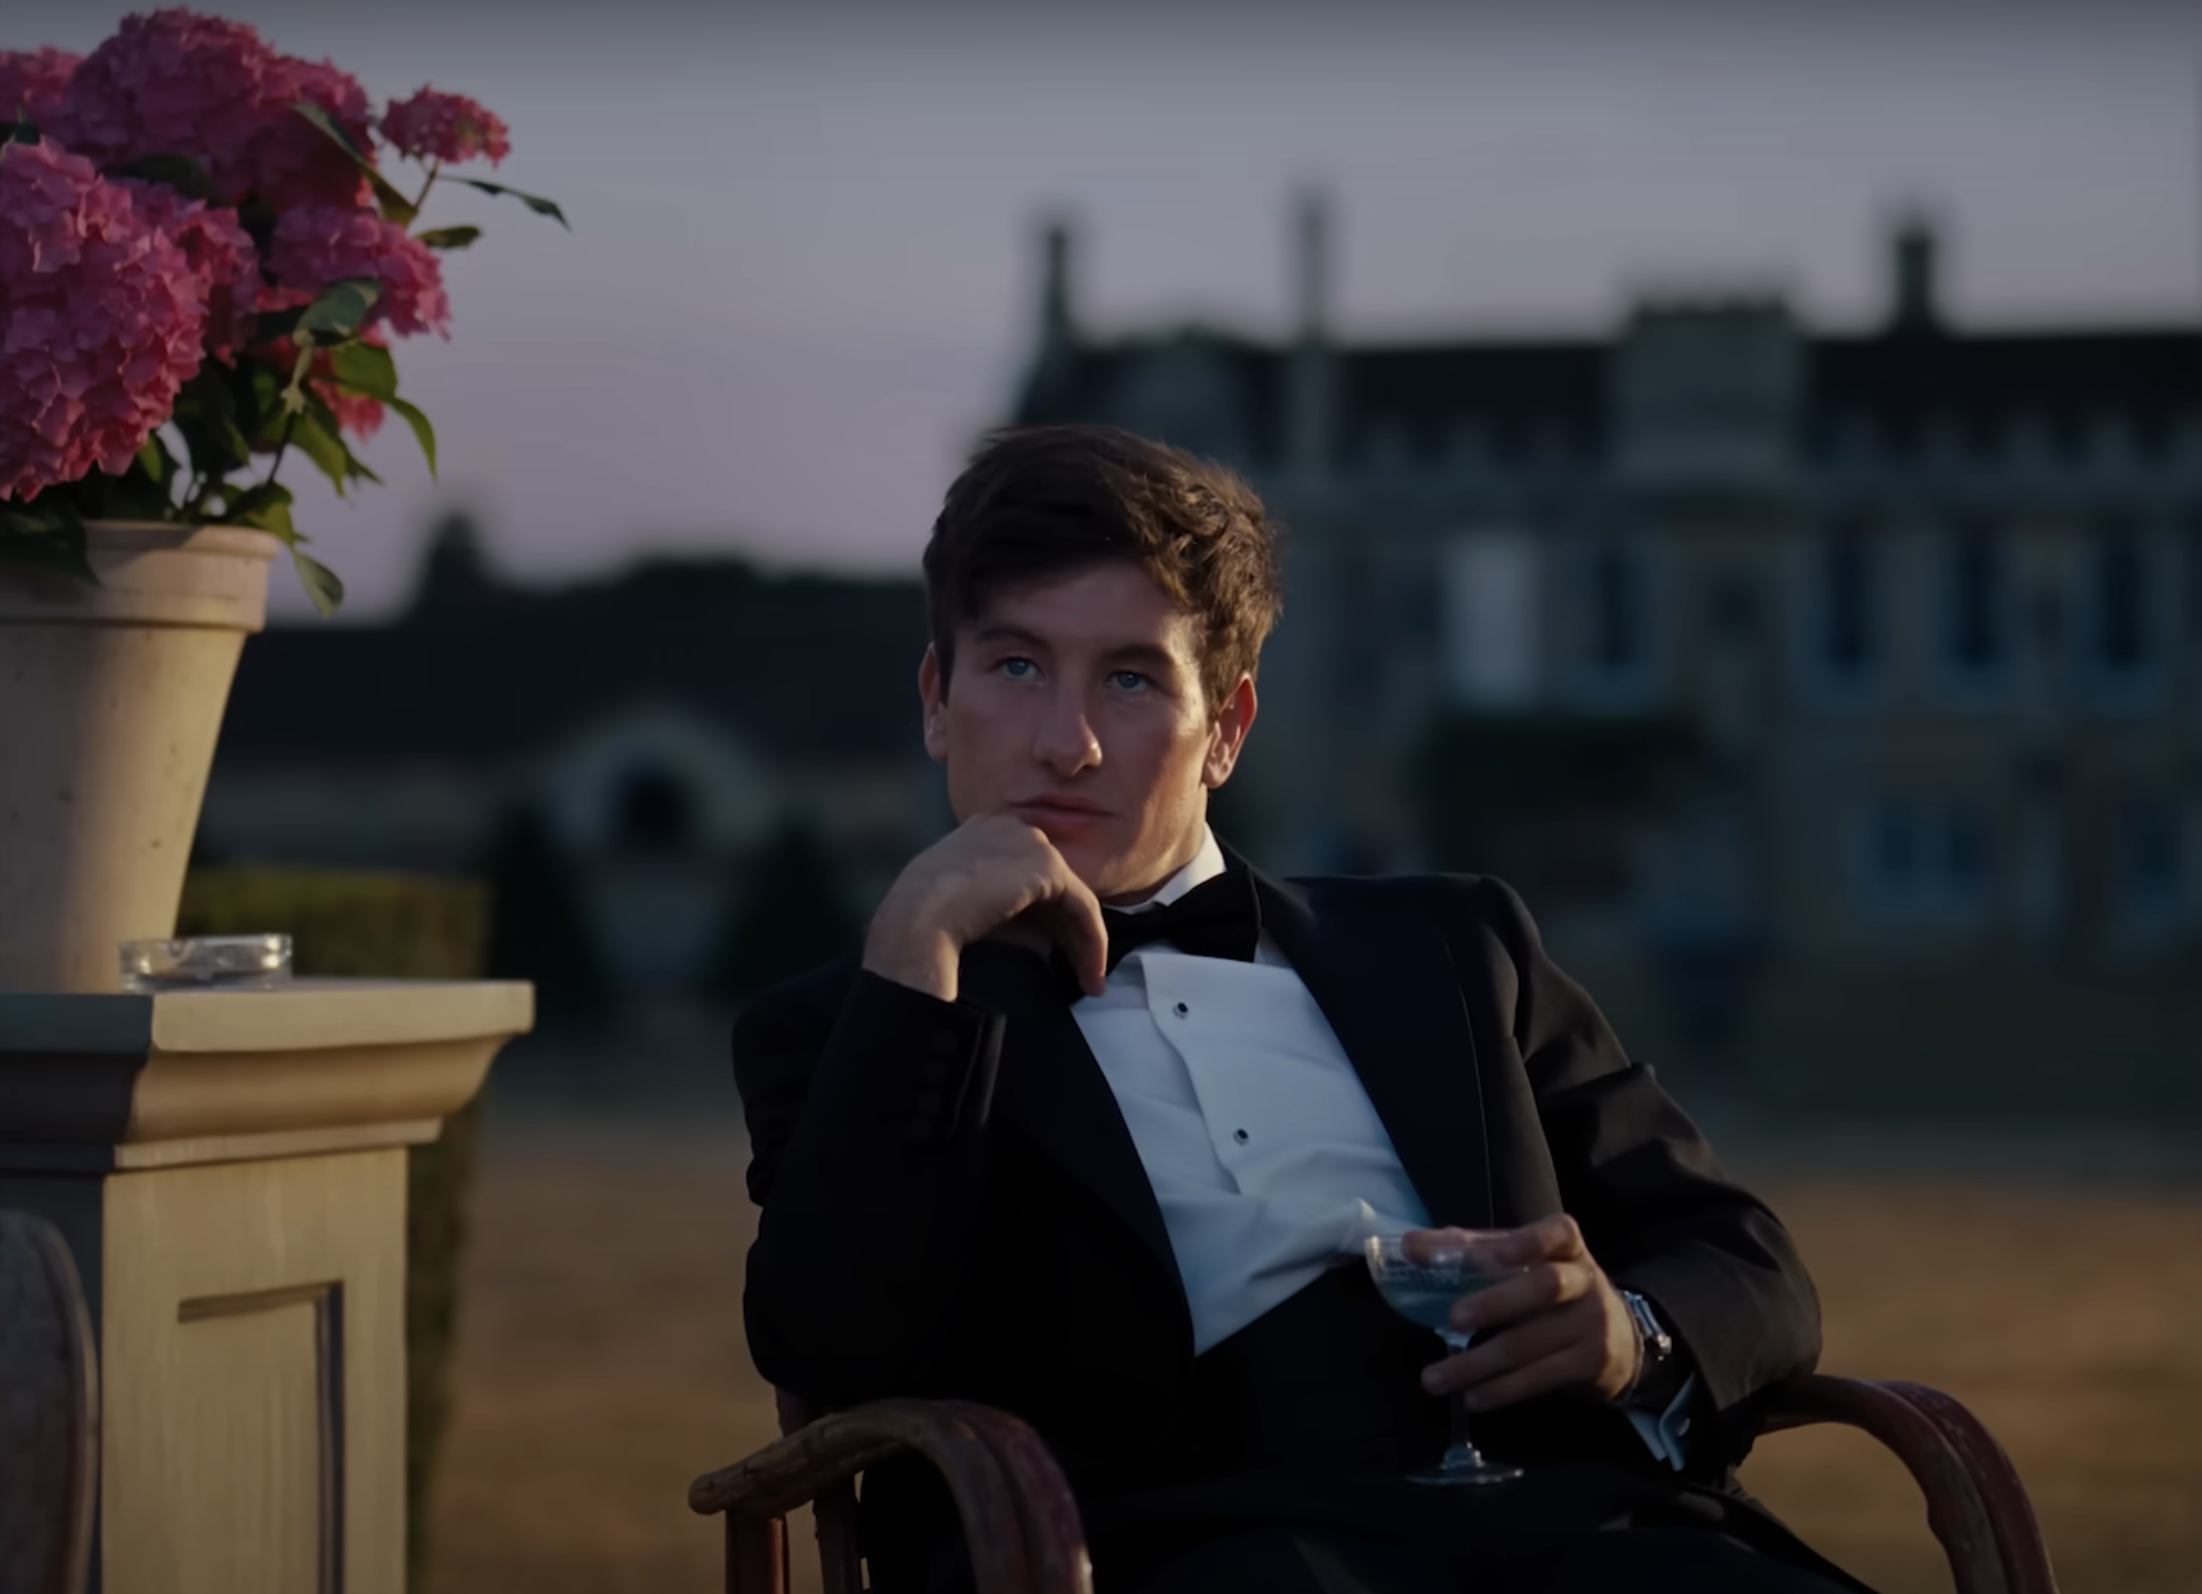 Oliver in a tuxedo sits contemplatively with a drink, outdoors at dusk, with a castle in the background